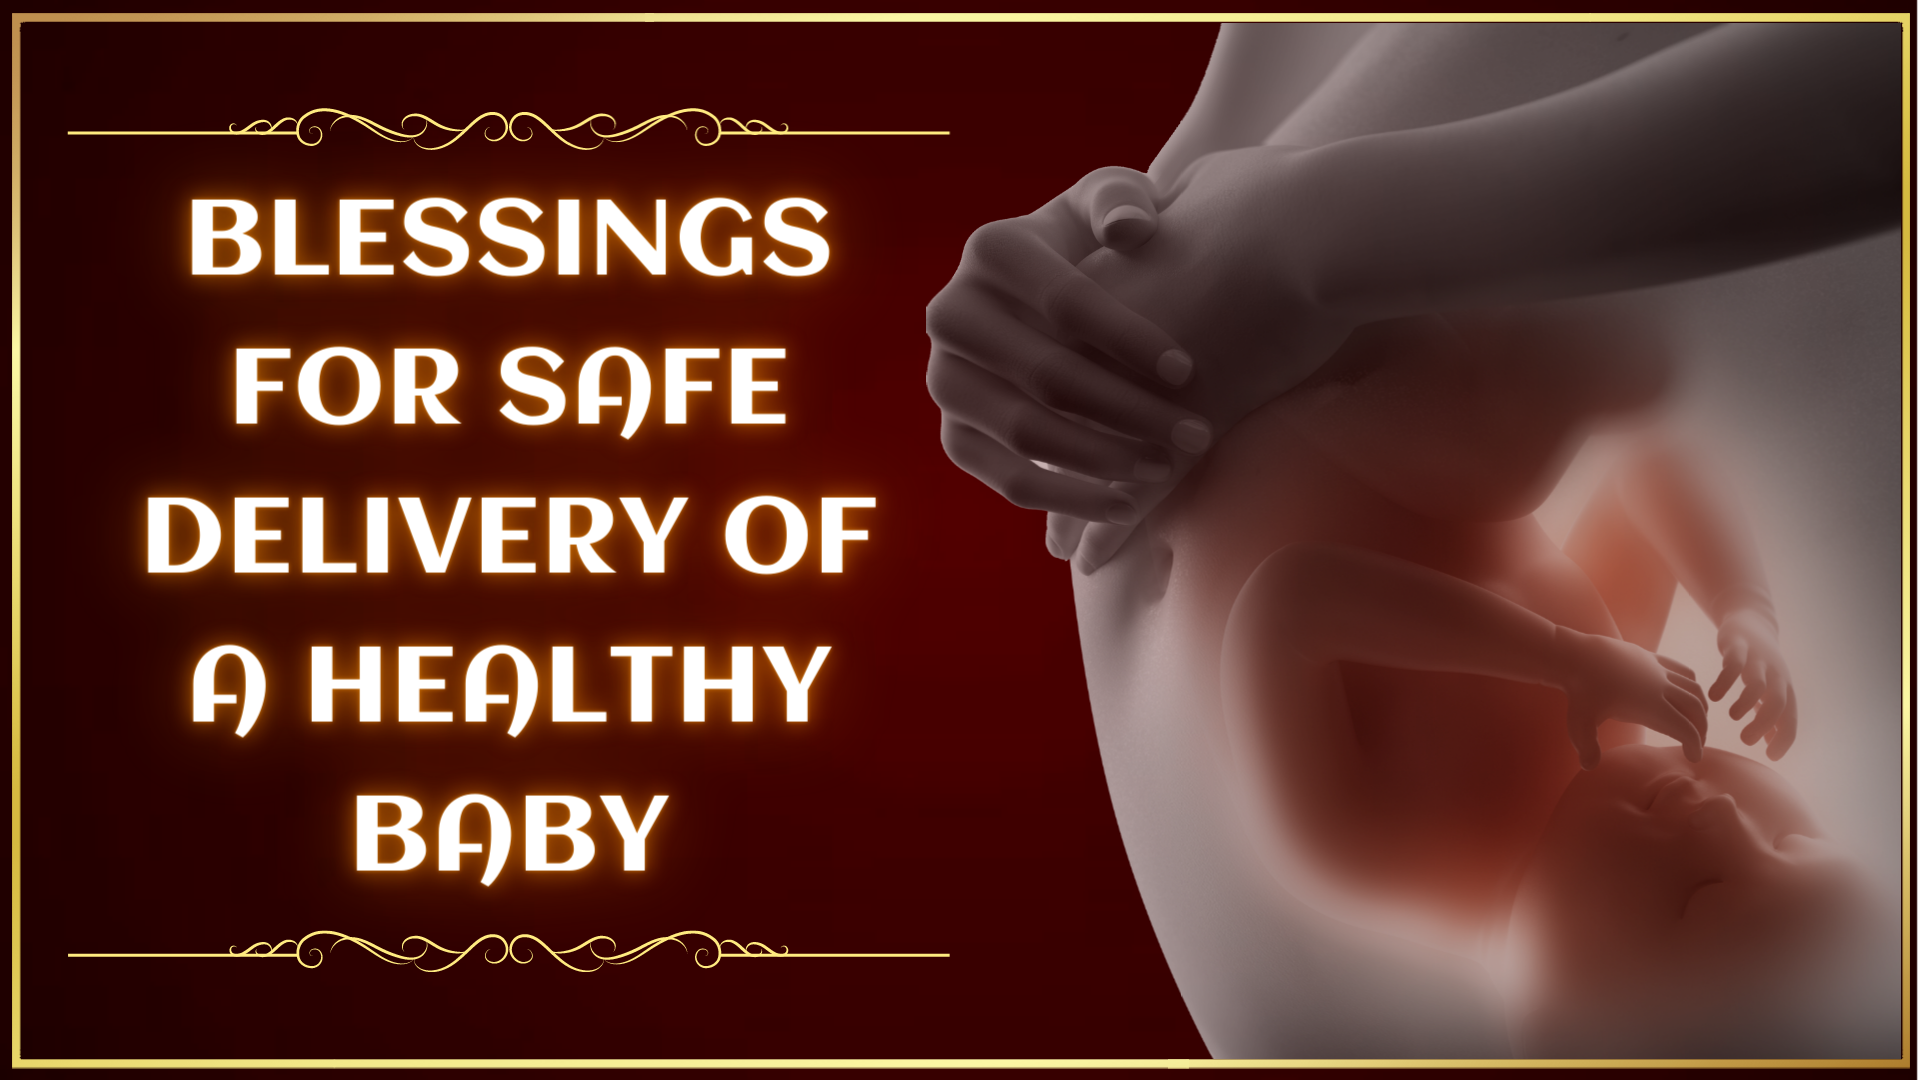 BLESSINGS FOR SAFE DELIVERY OF A HEALTHY BABY